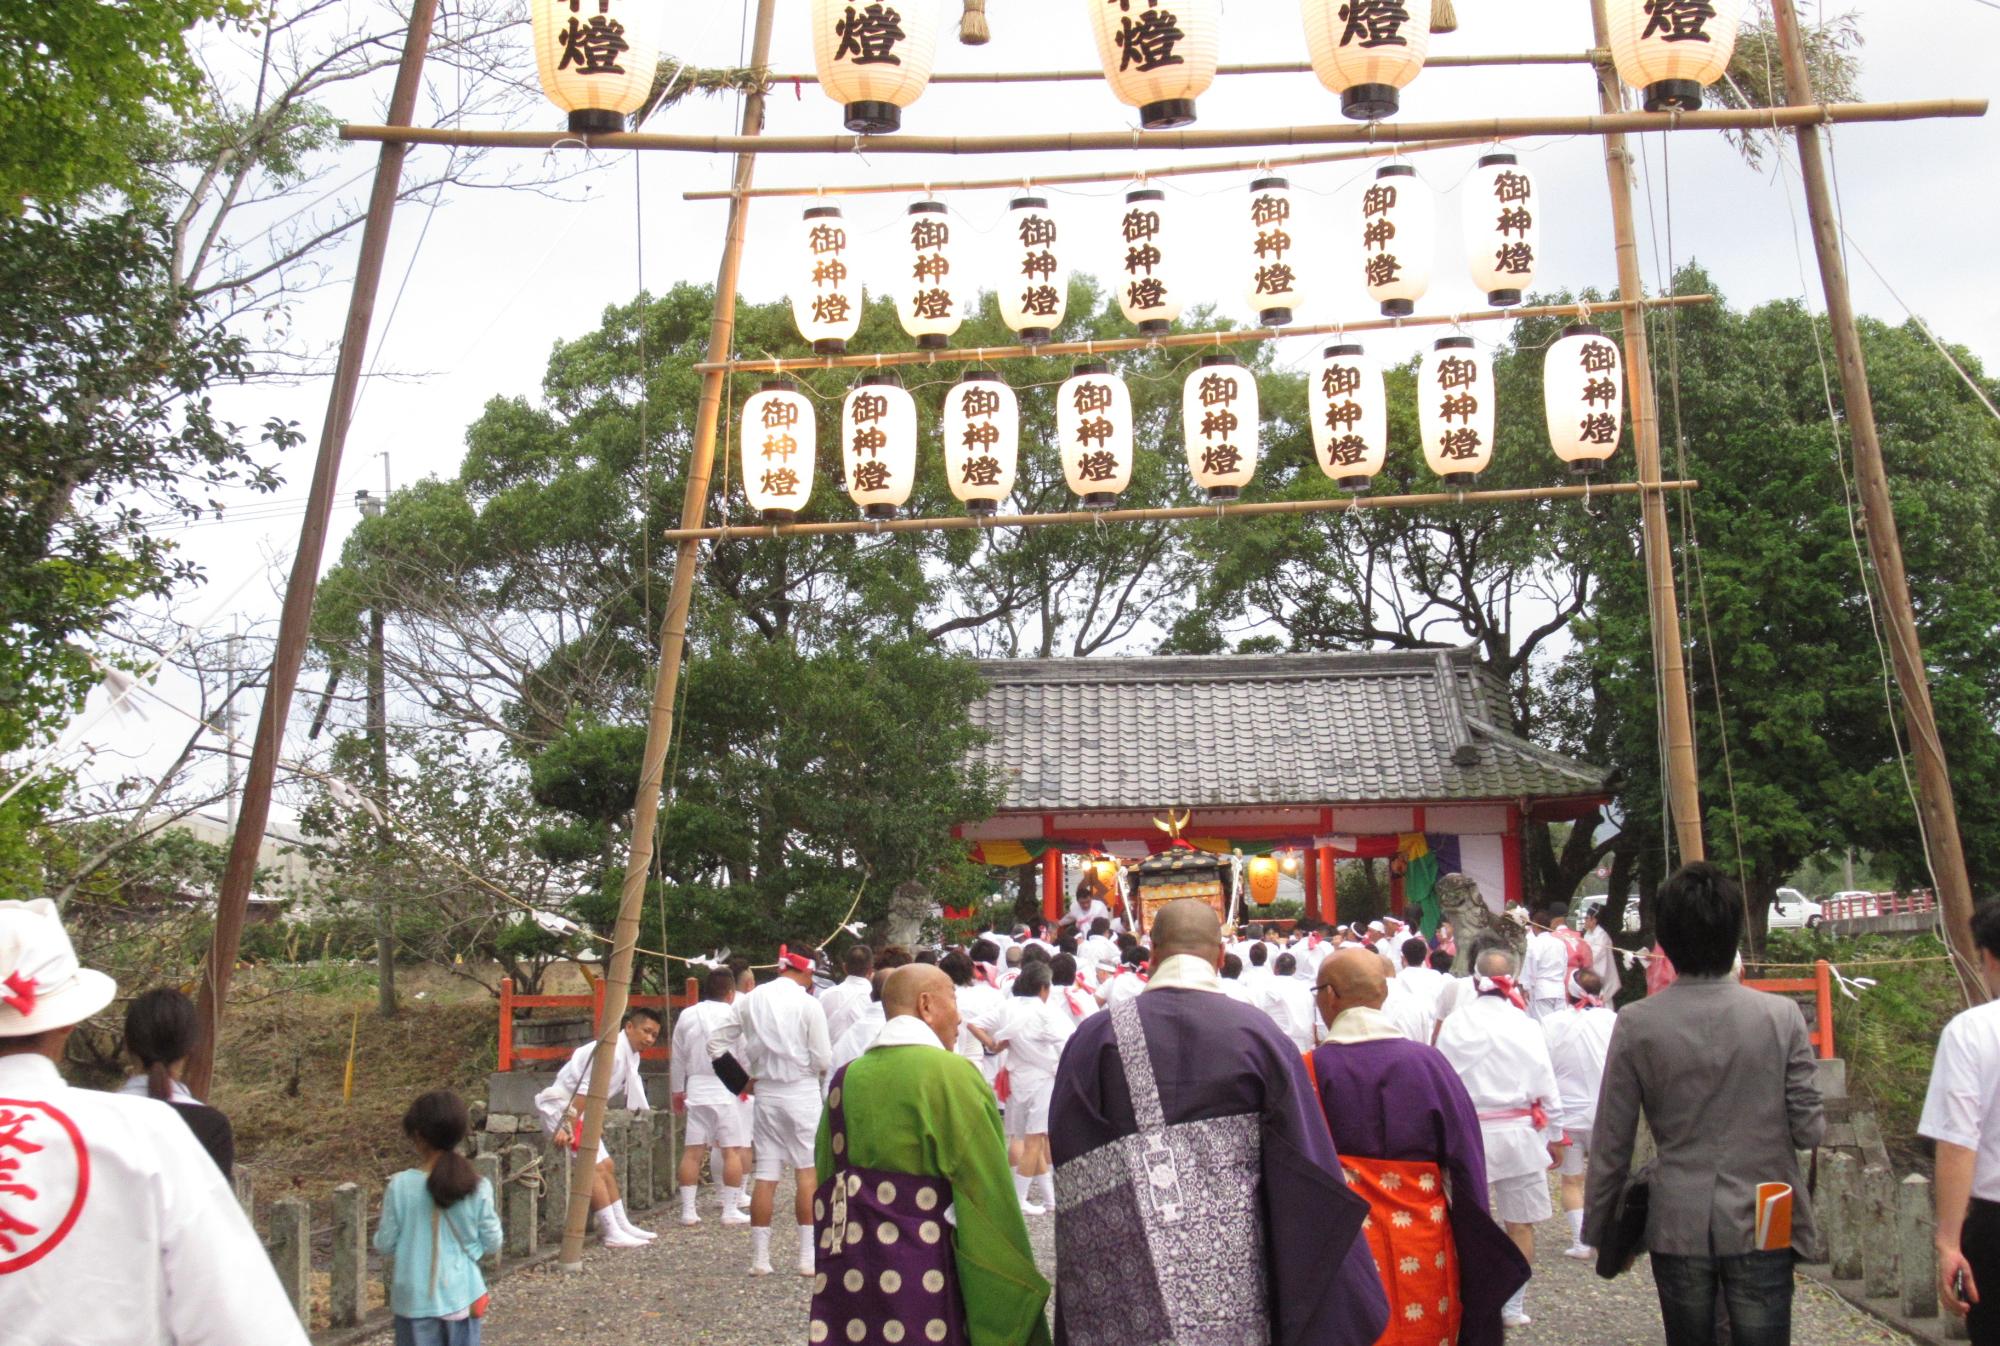 Portable shrine procession arriving at the Ukiden